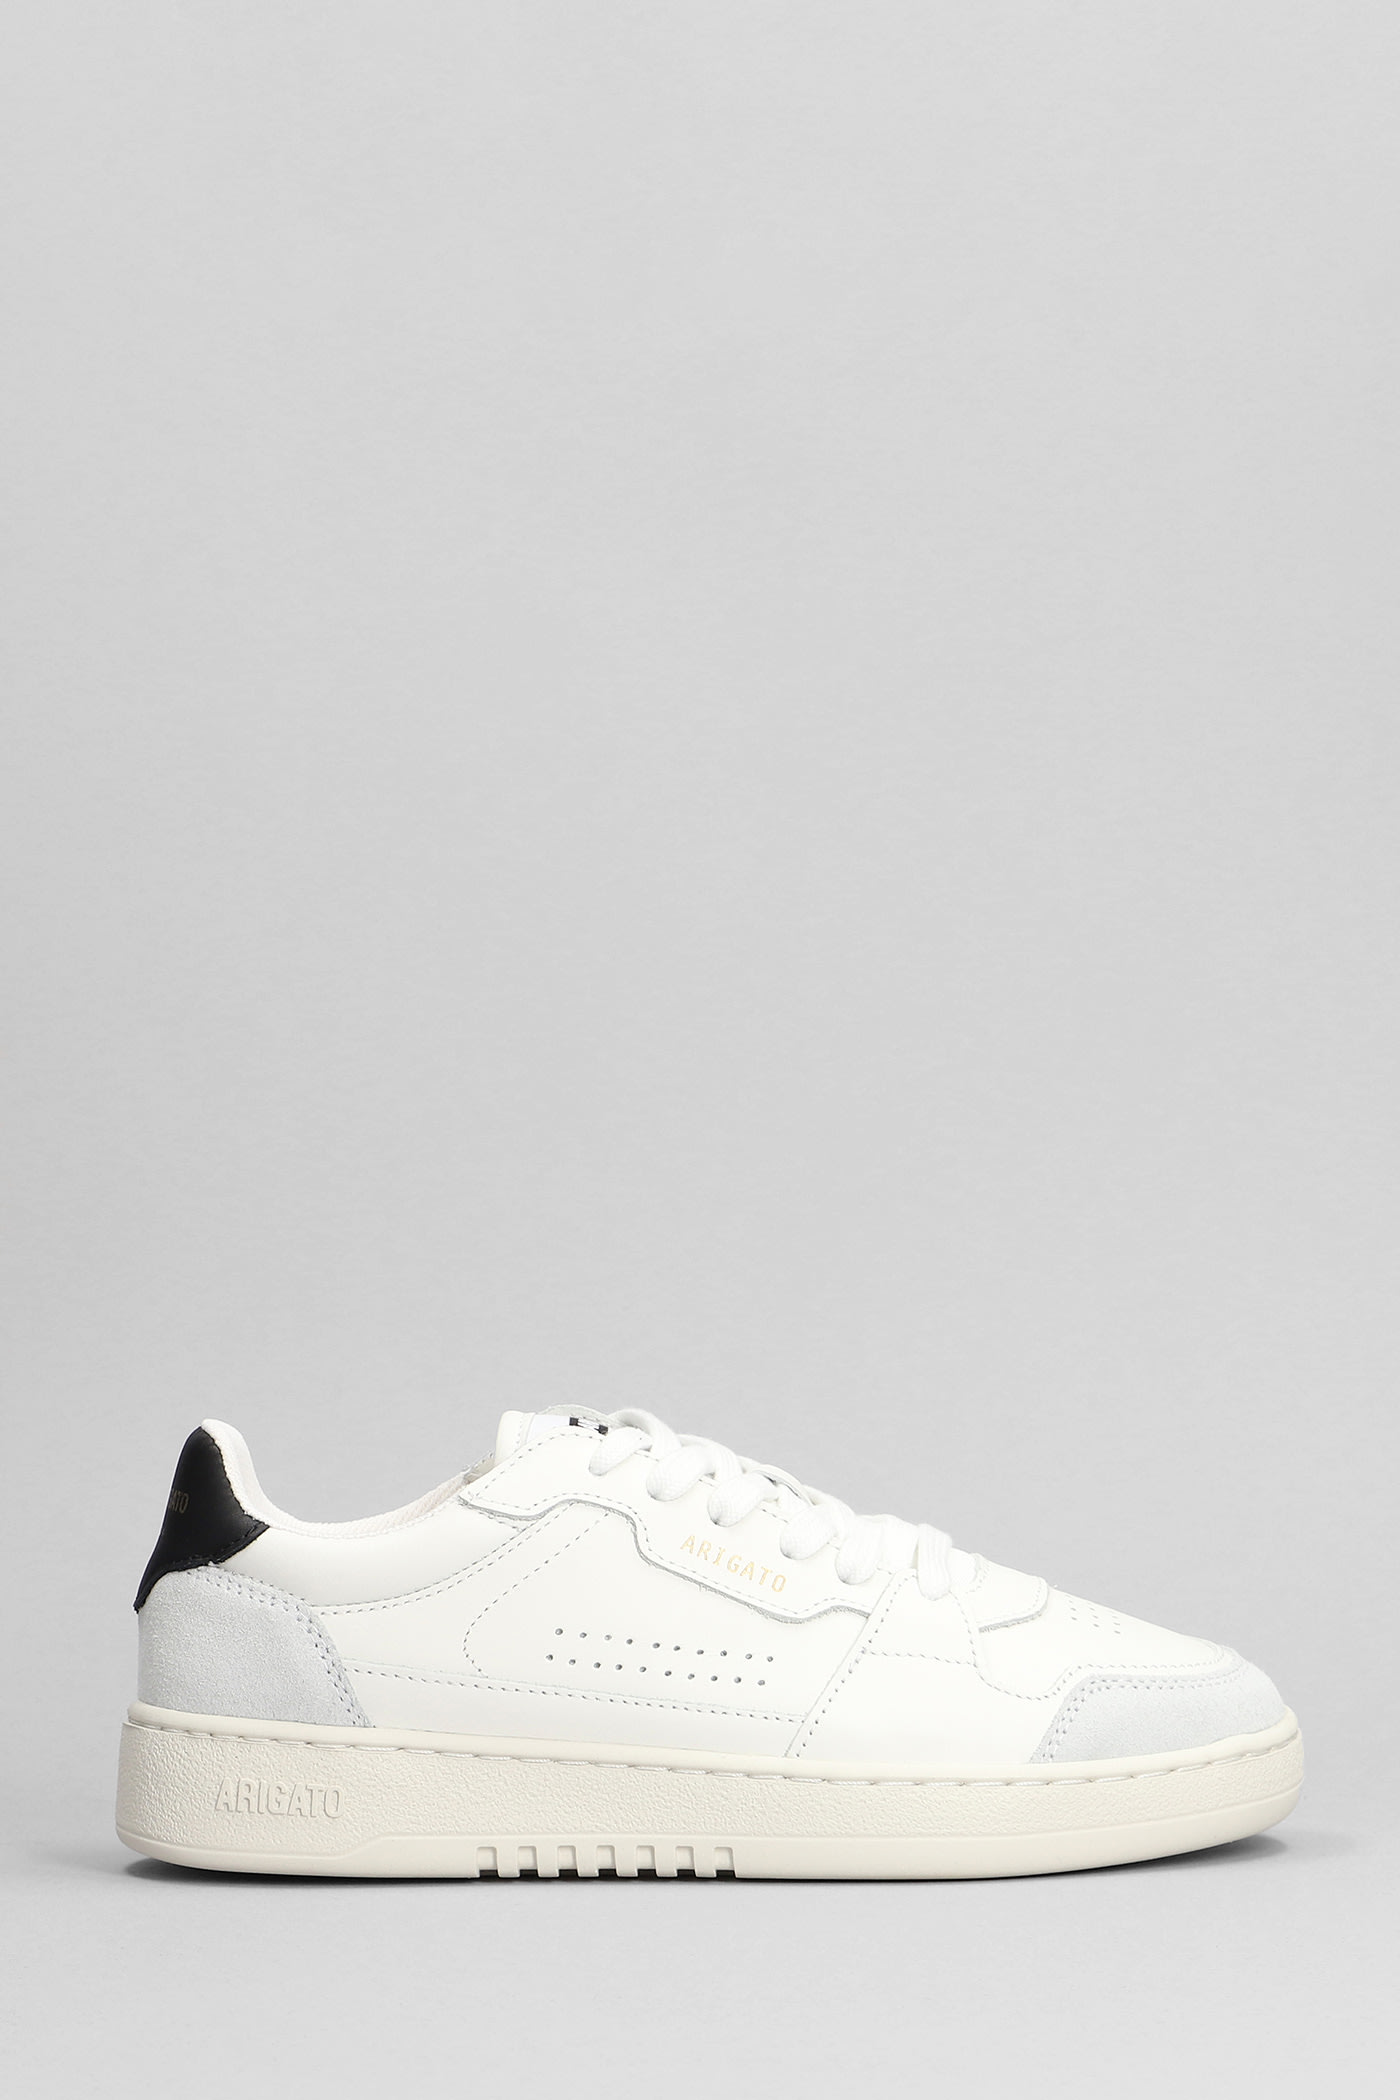 Axel Arigato Dice Lo Trainers In White Suede And Leather